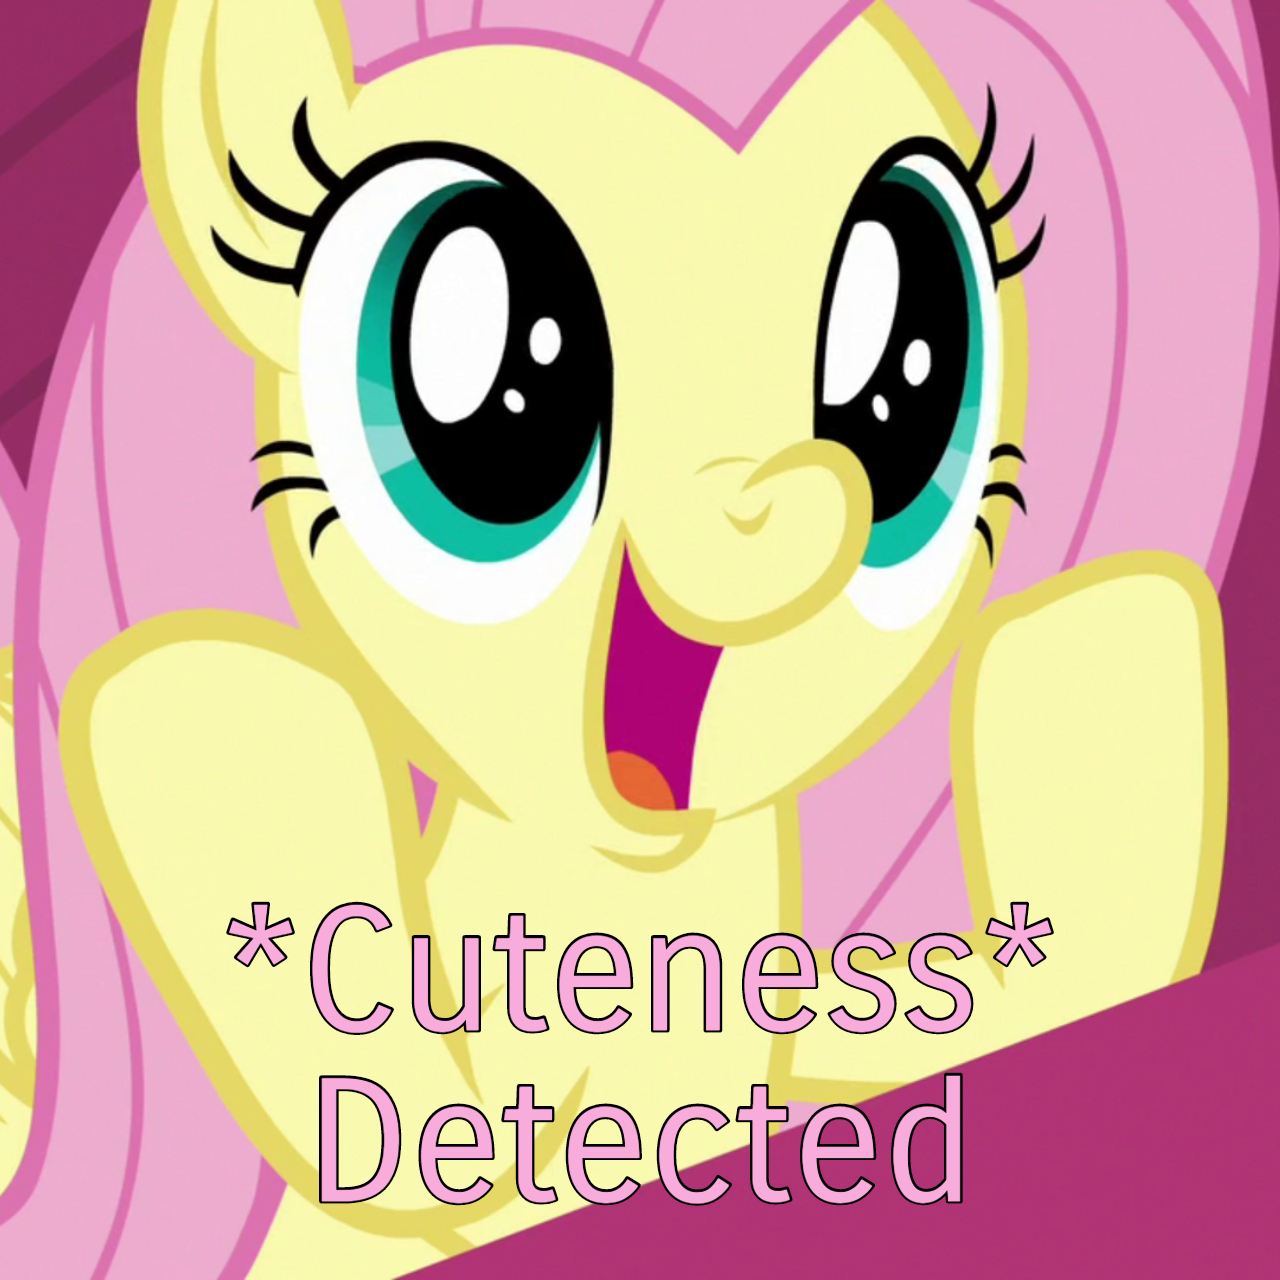 High Quality Cuteness Detected (MLP) Blank Meme Template